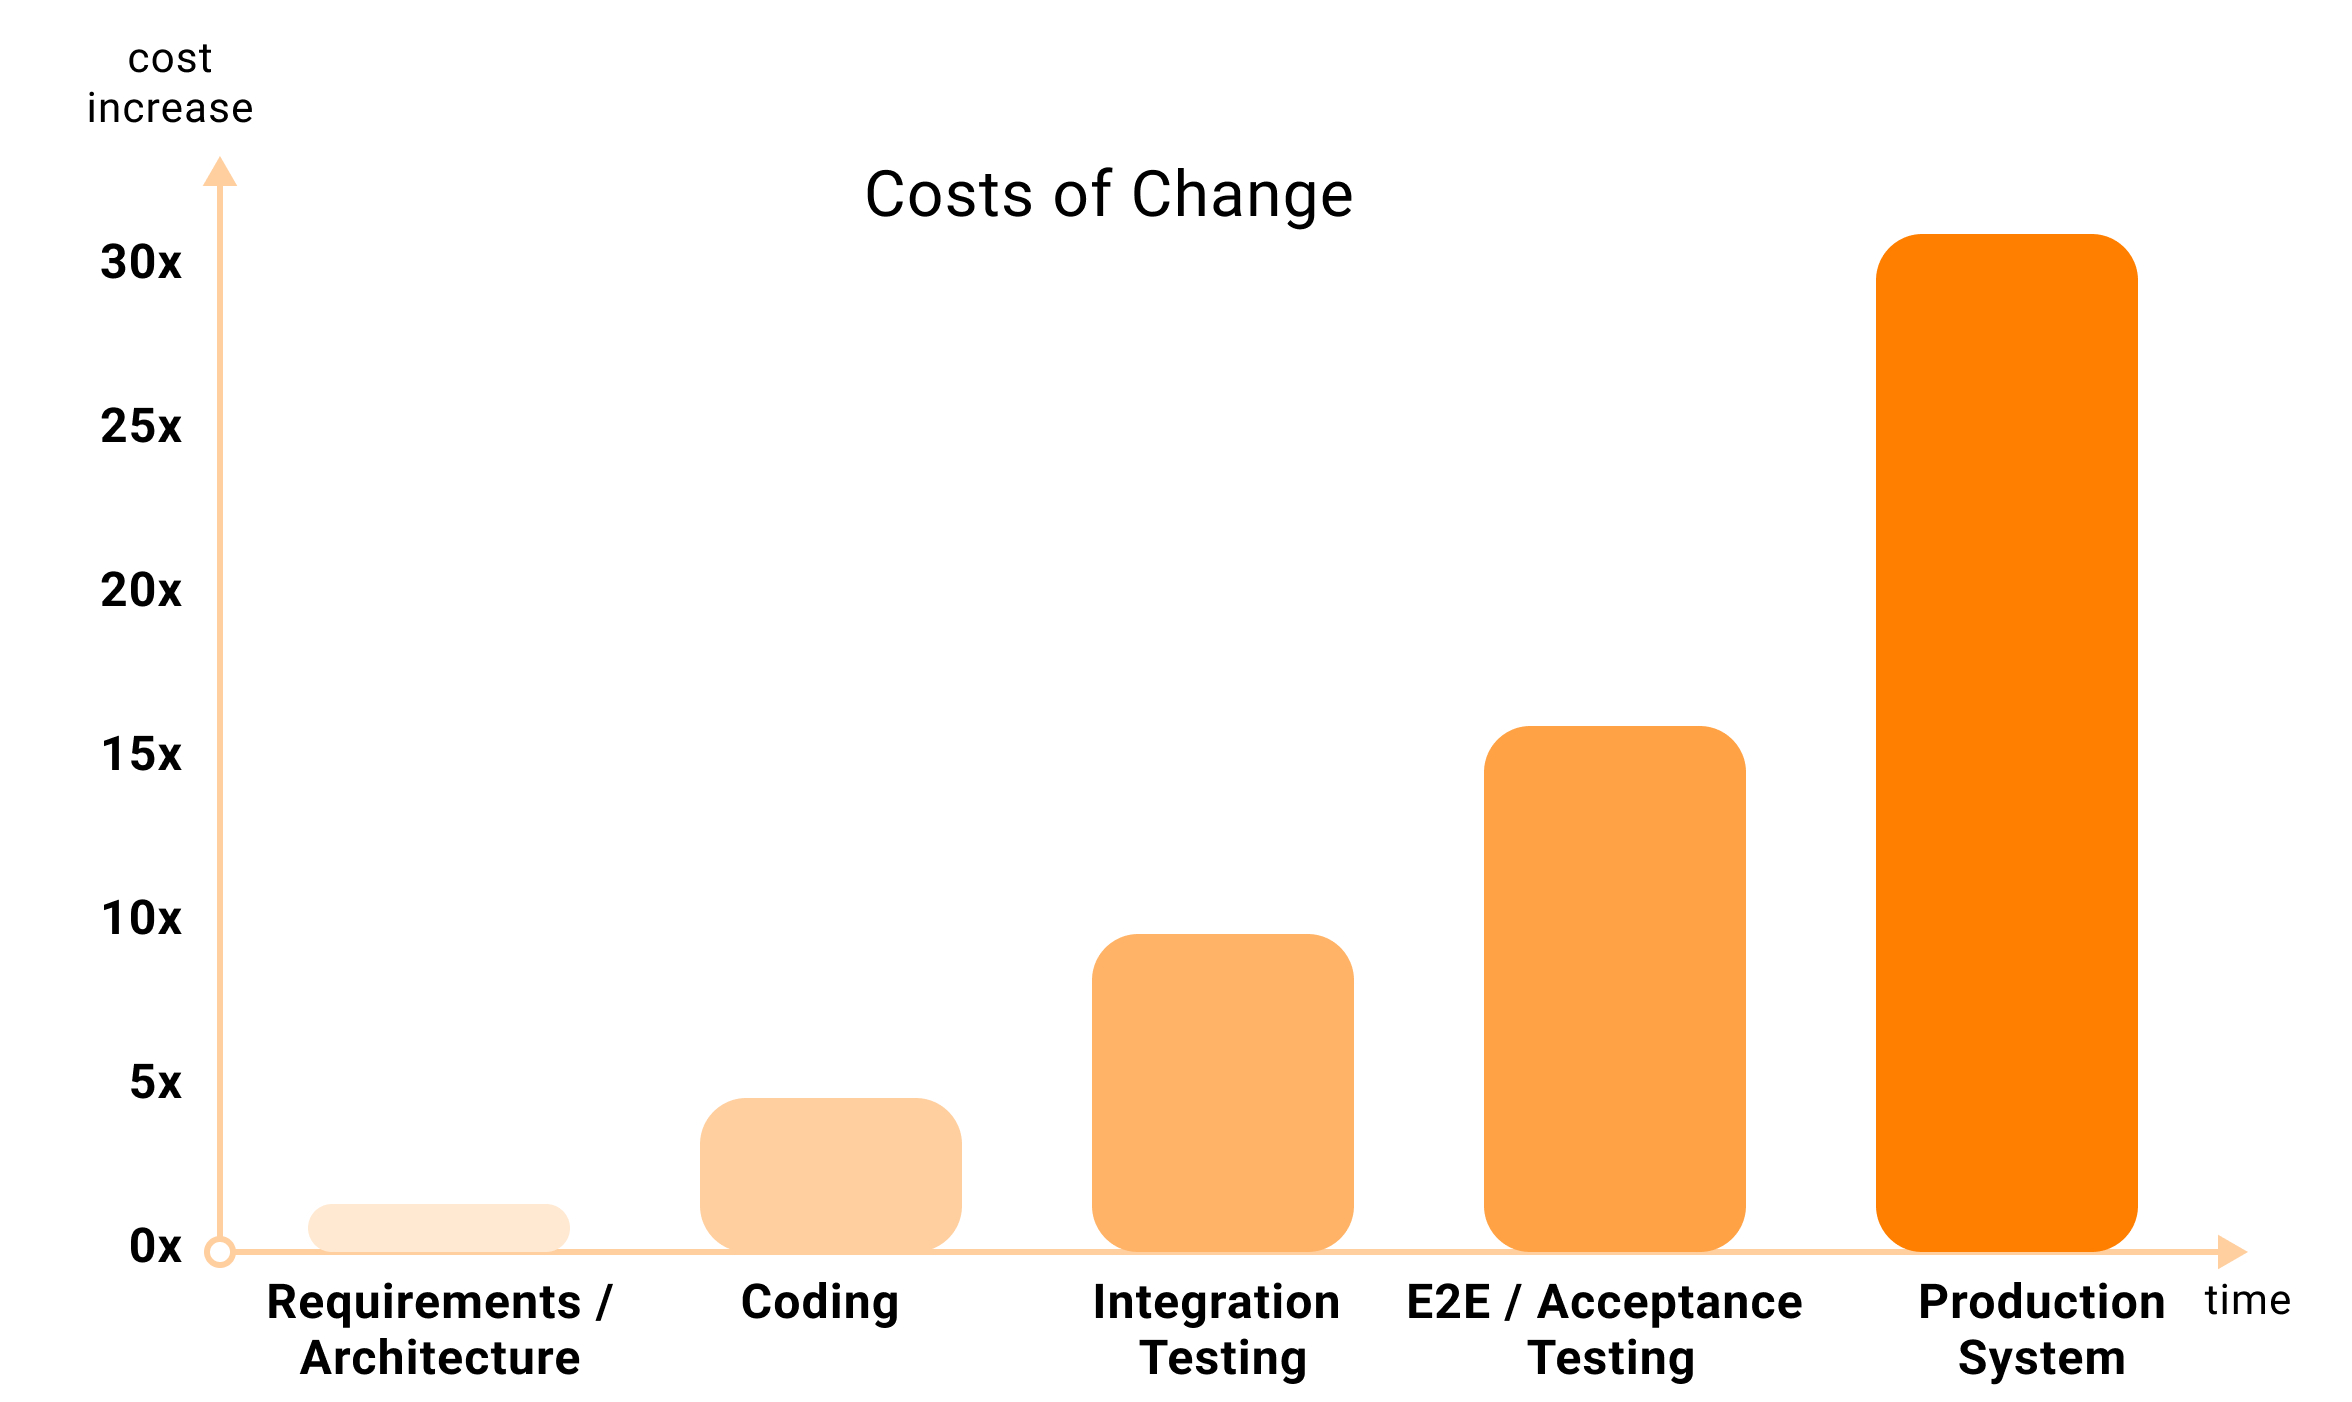 Costs of Change